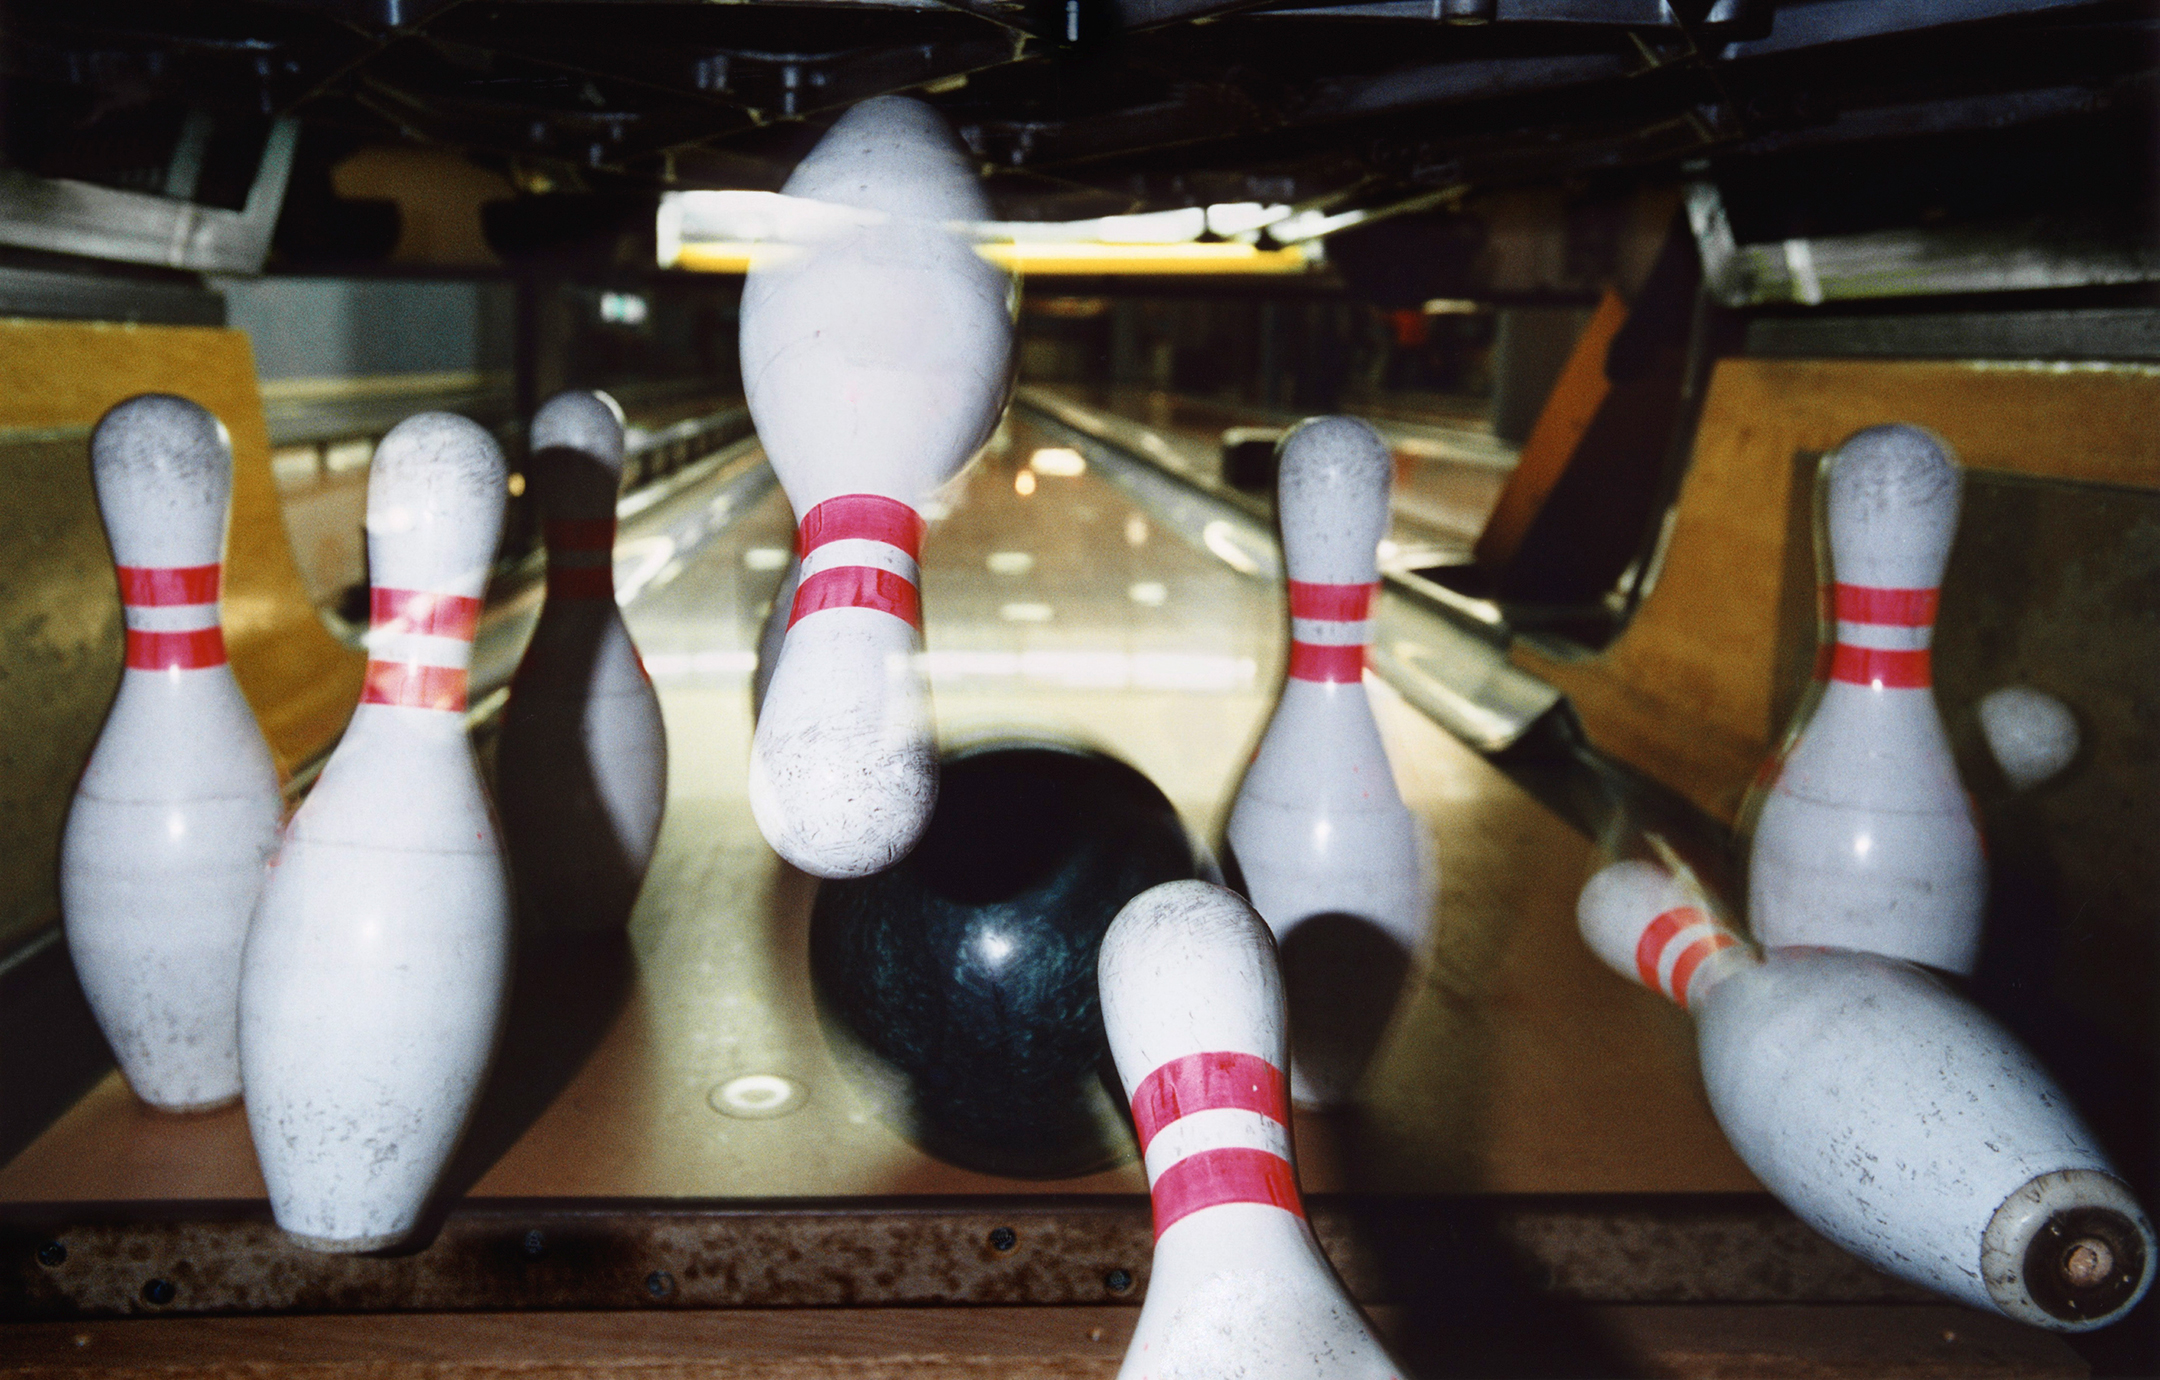 A set of bowling pins seen from behind as a bowling ball knocks them down